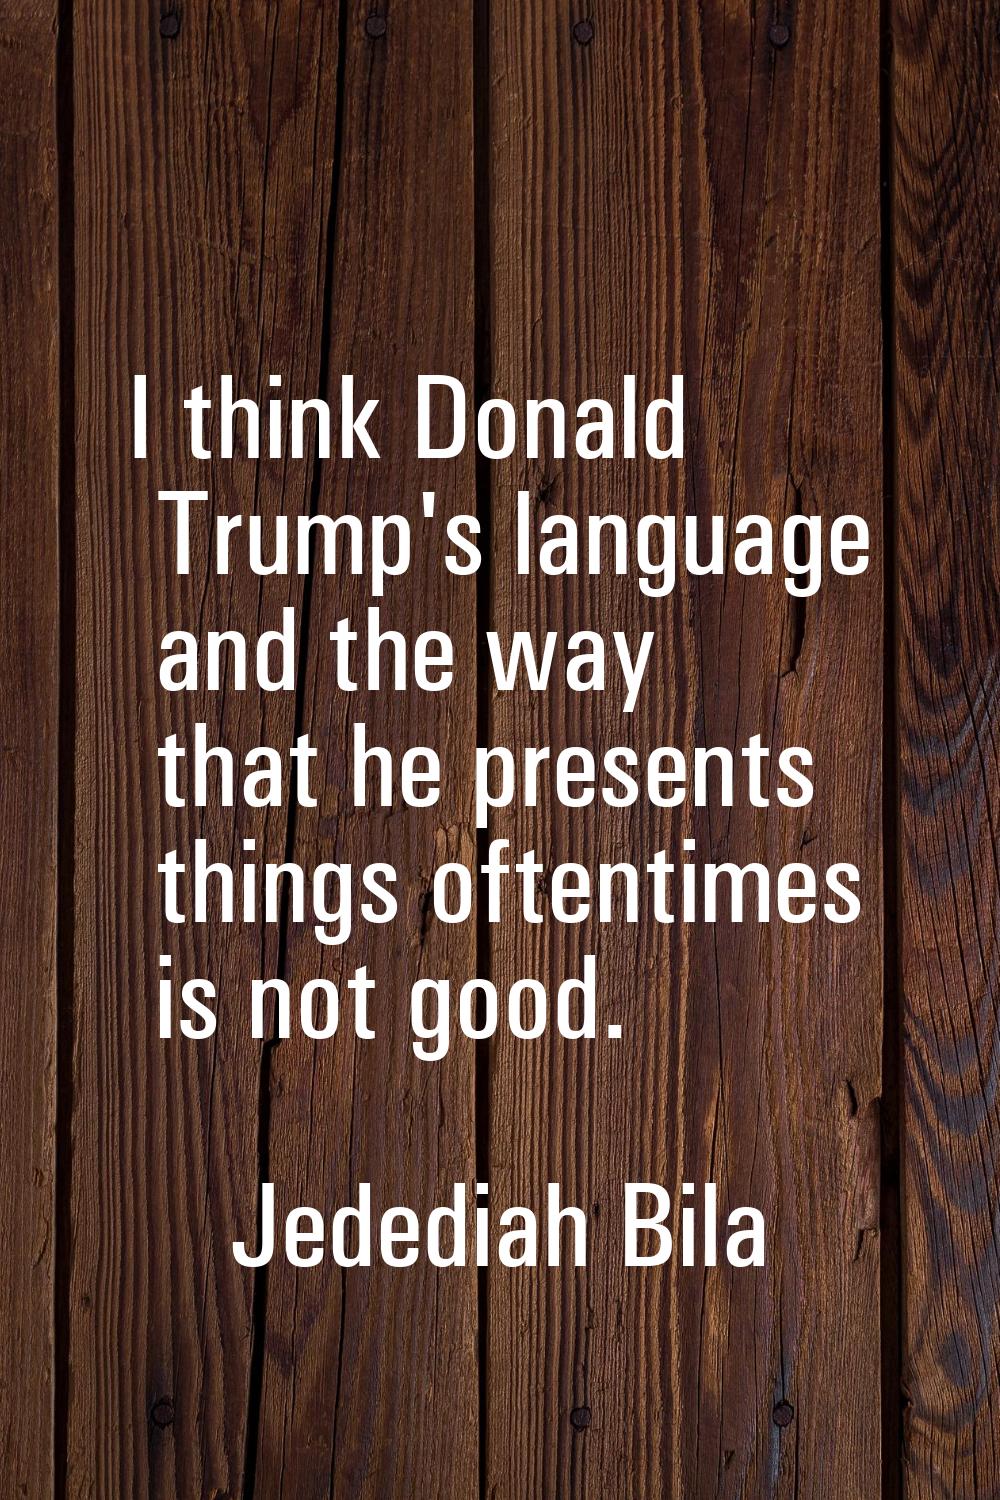 I think Donald Trump's language and the way that he presents things oftentimes is not good.